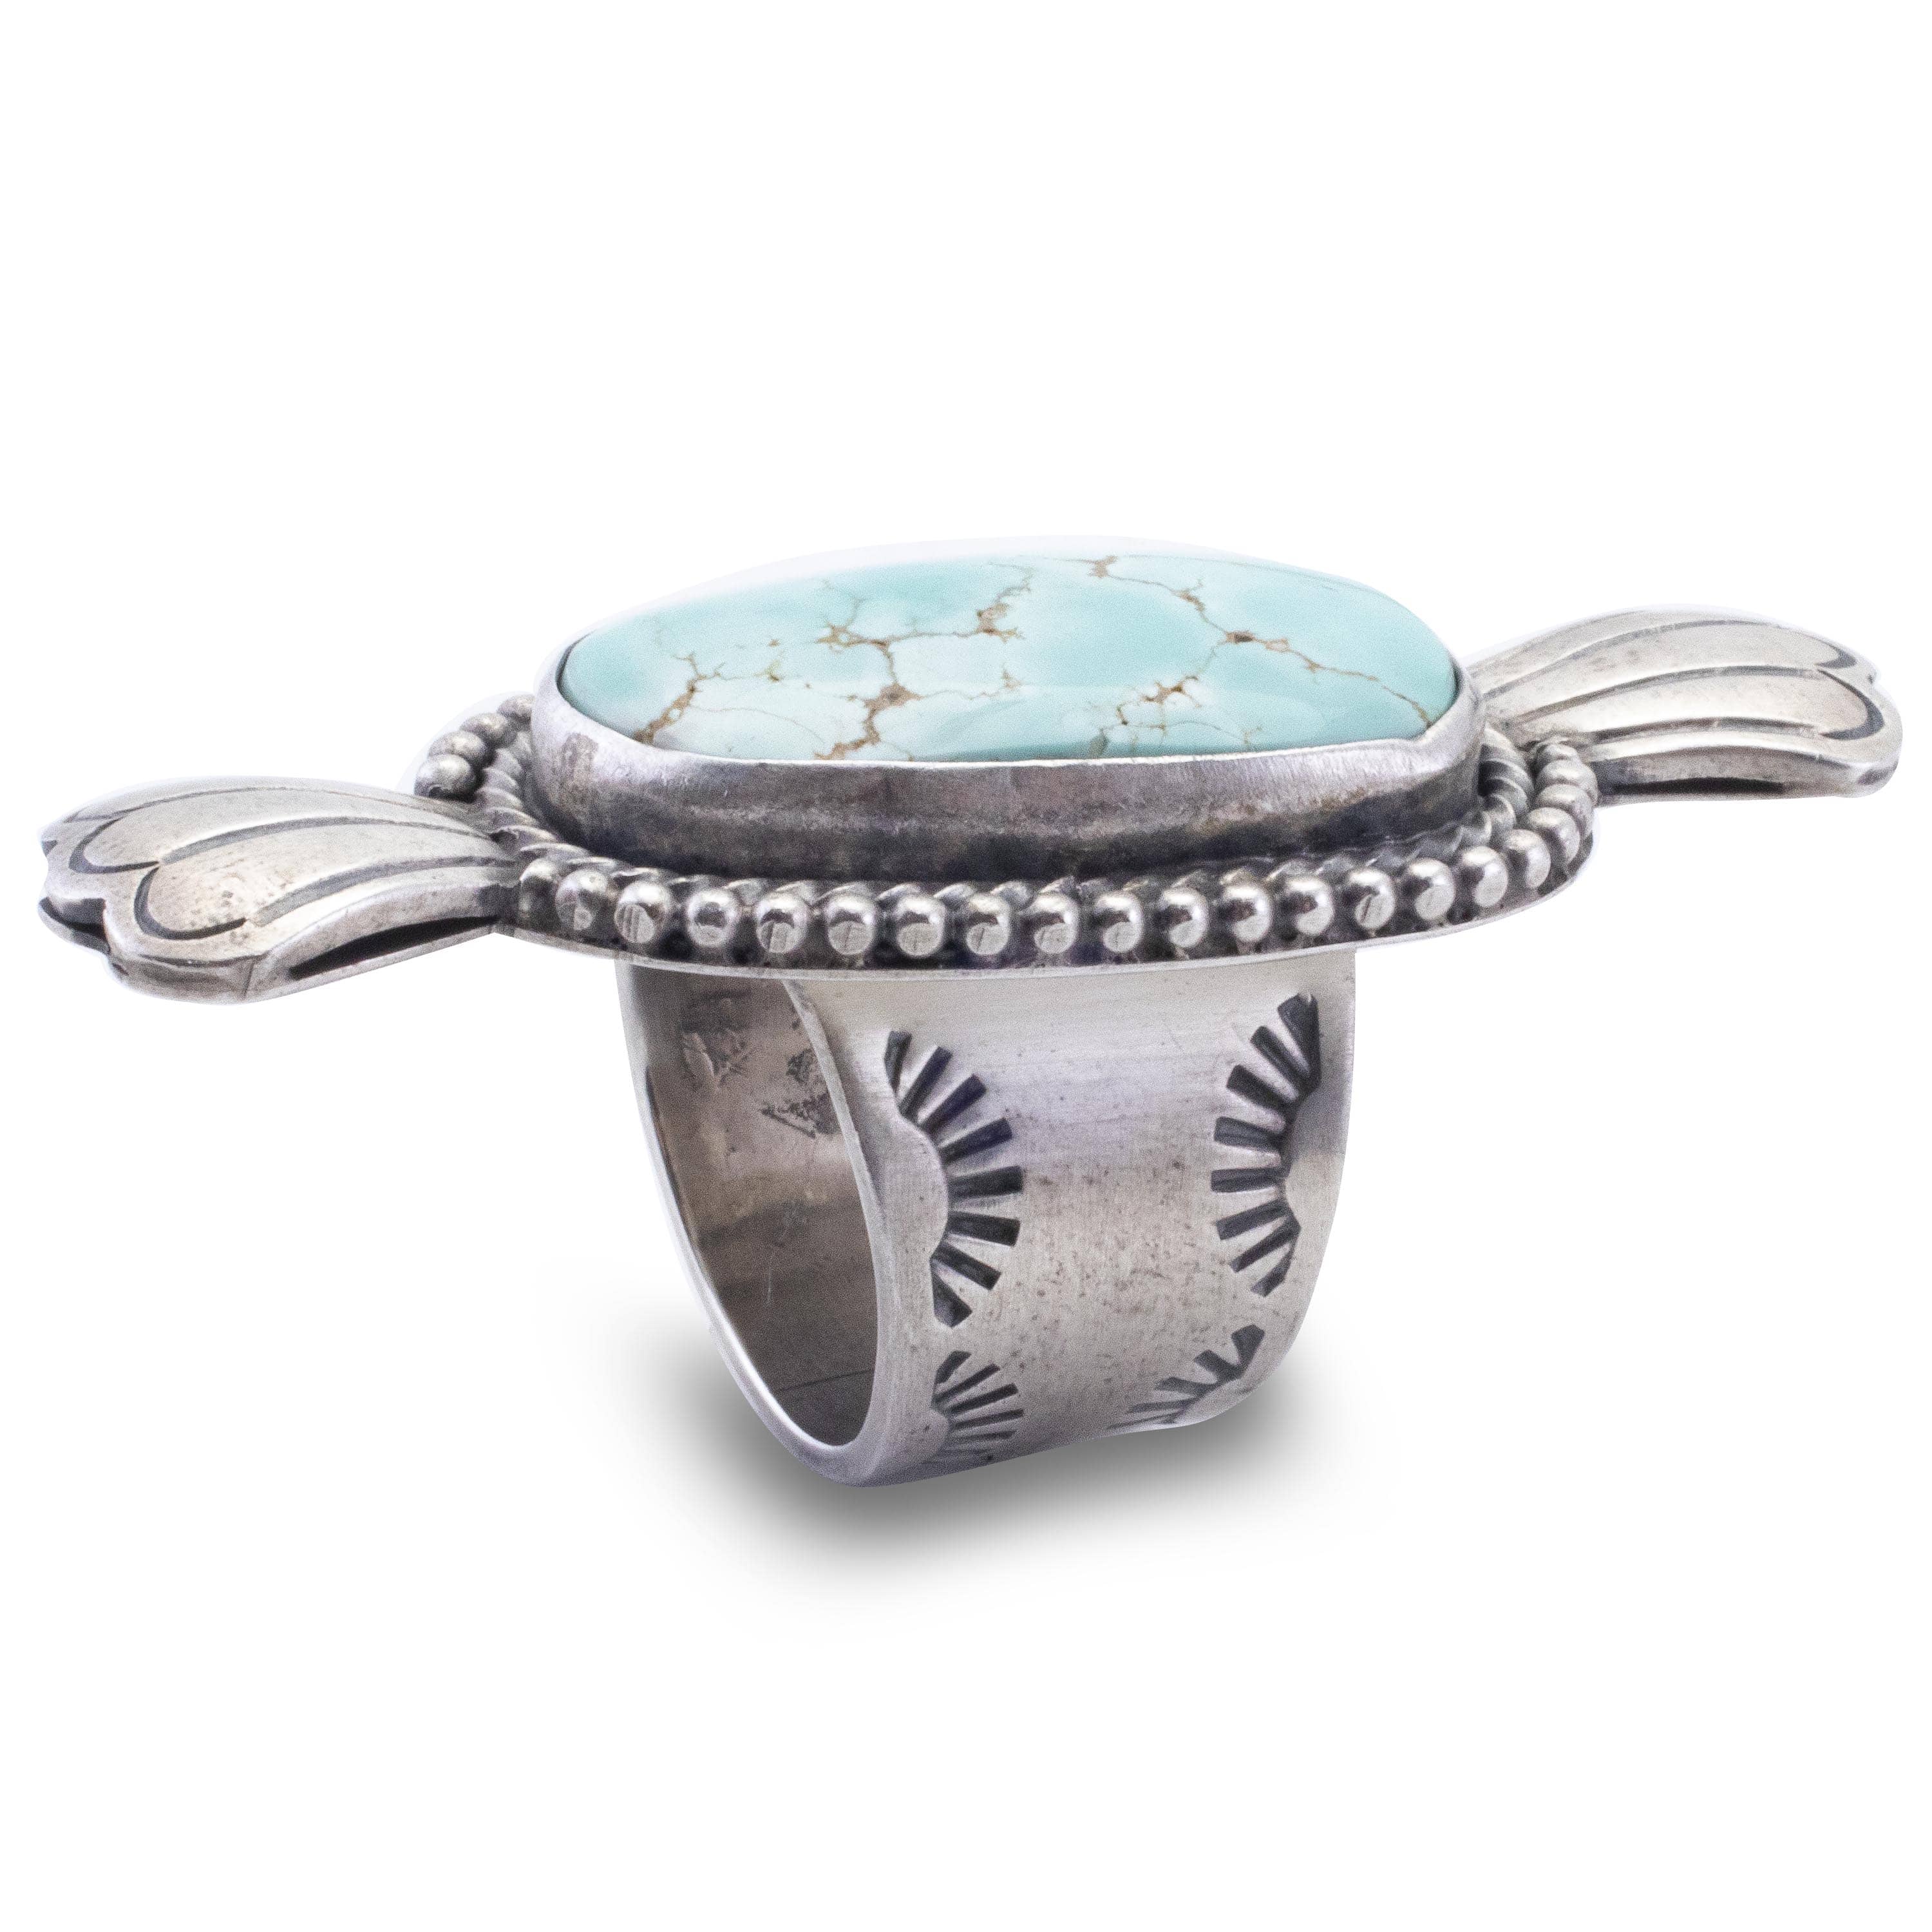 Kalifano Native American Jewelry 7 Marvin McReeves Navajo Carico Lake Turquoise USA Native American Made 925 Sterling Silver Ring NAR1500.020.7